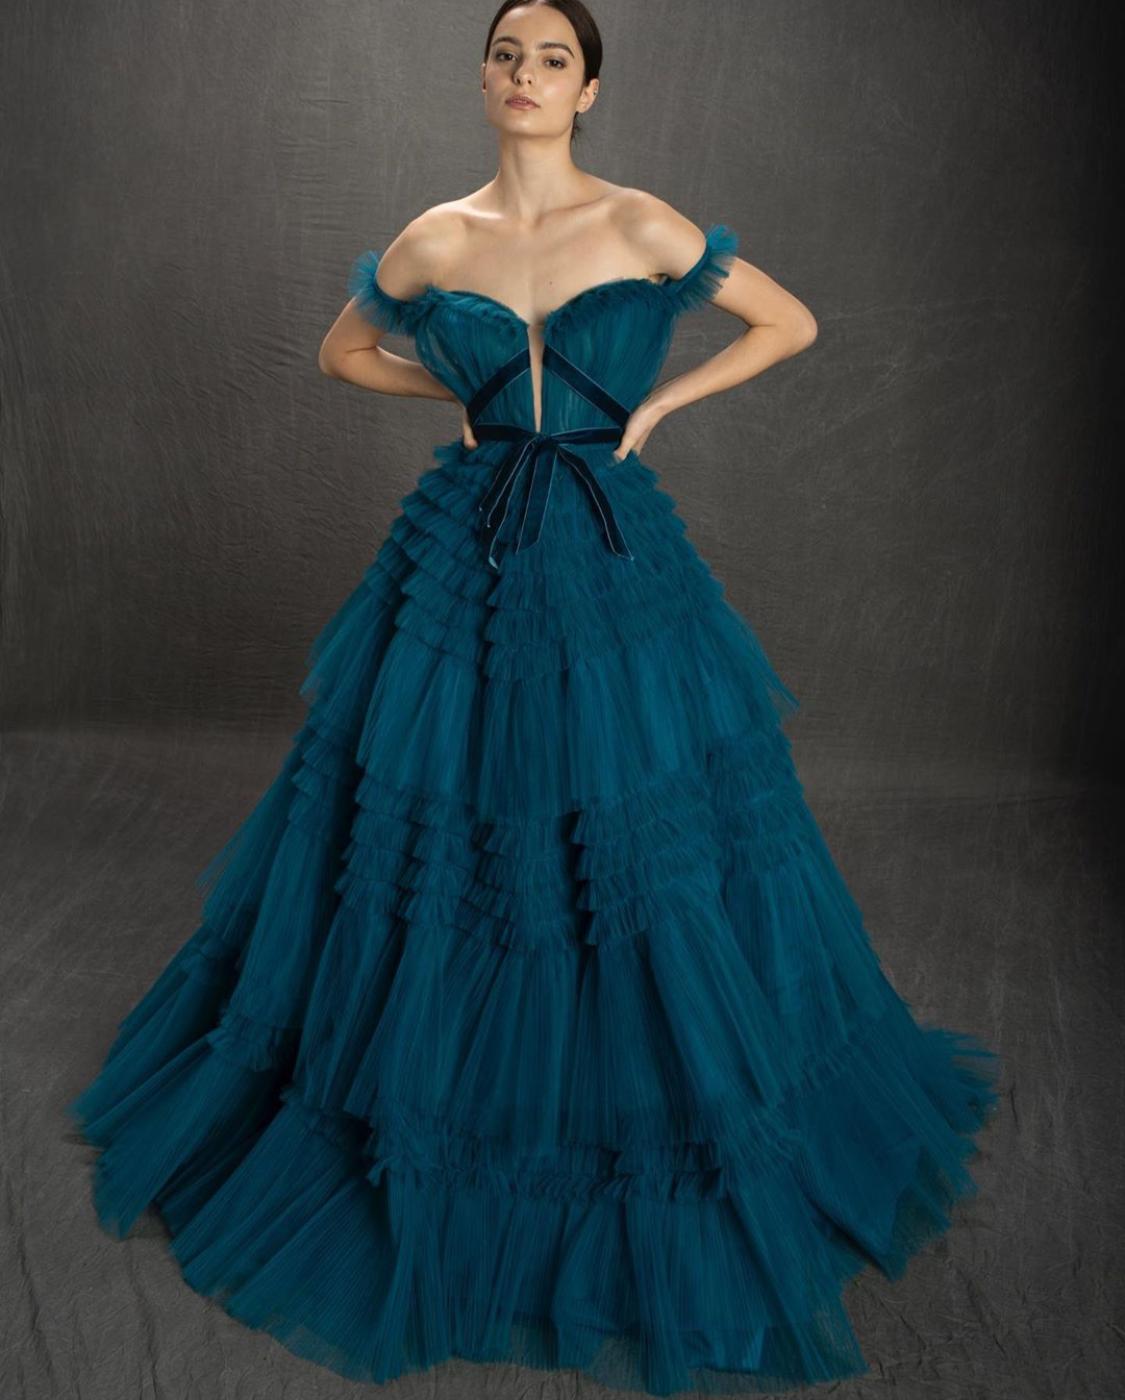 Blue A-Line dress with off the shoulder sleeves and ruffles